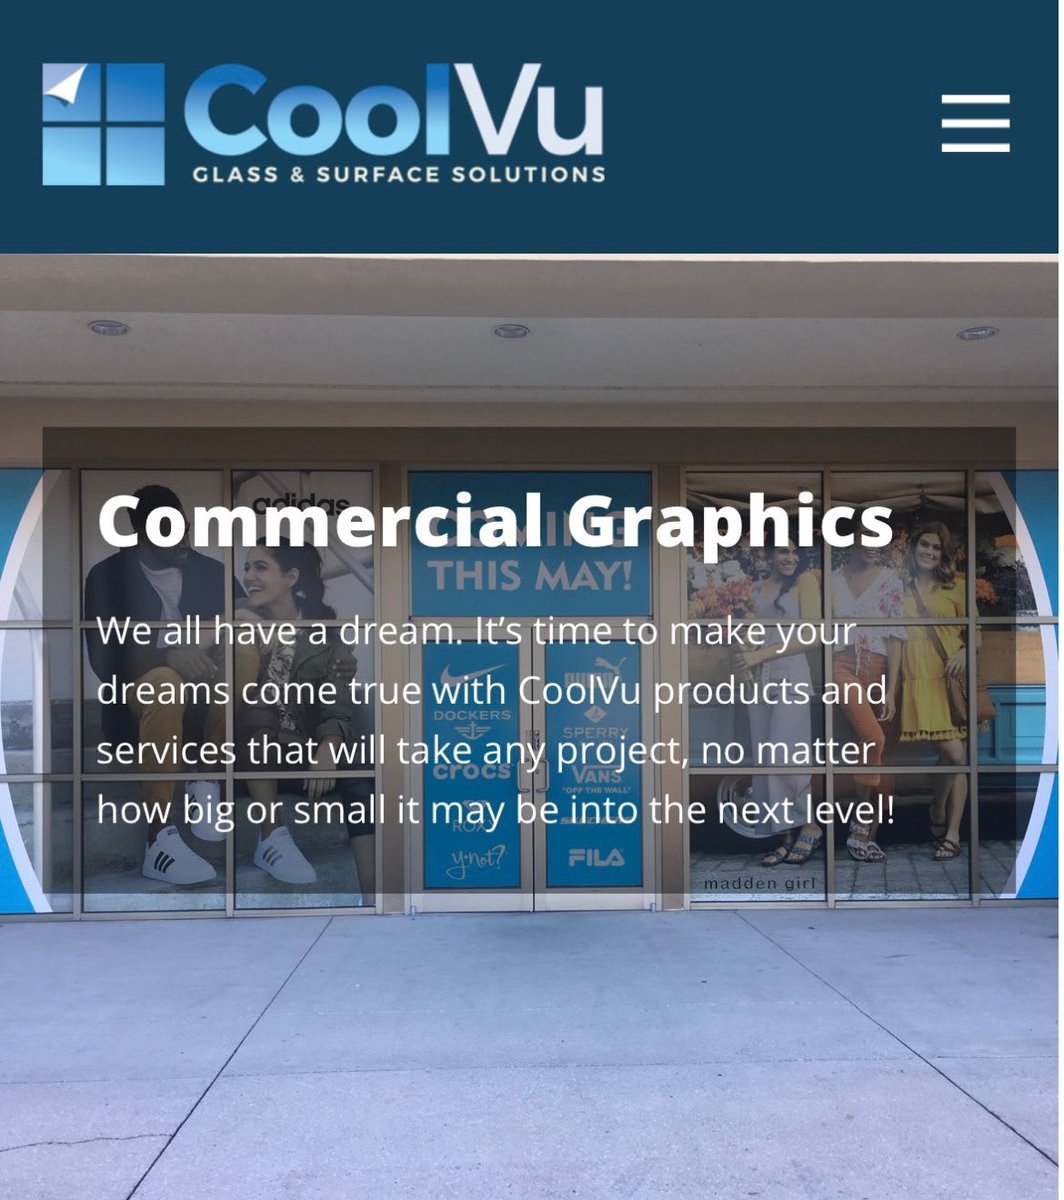 Enhance your space with captivating commercial graphics 🎨✨. Let our expertise create eye-catching designs that elevate your brand and leave a lasting impression. #CommercialGraphics #BrandElevation #coolvu